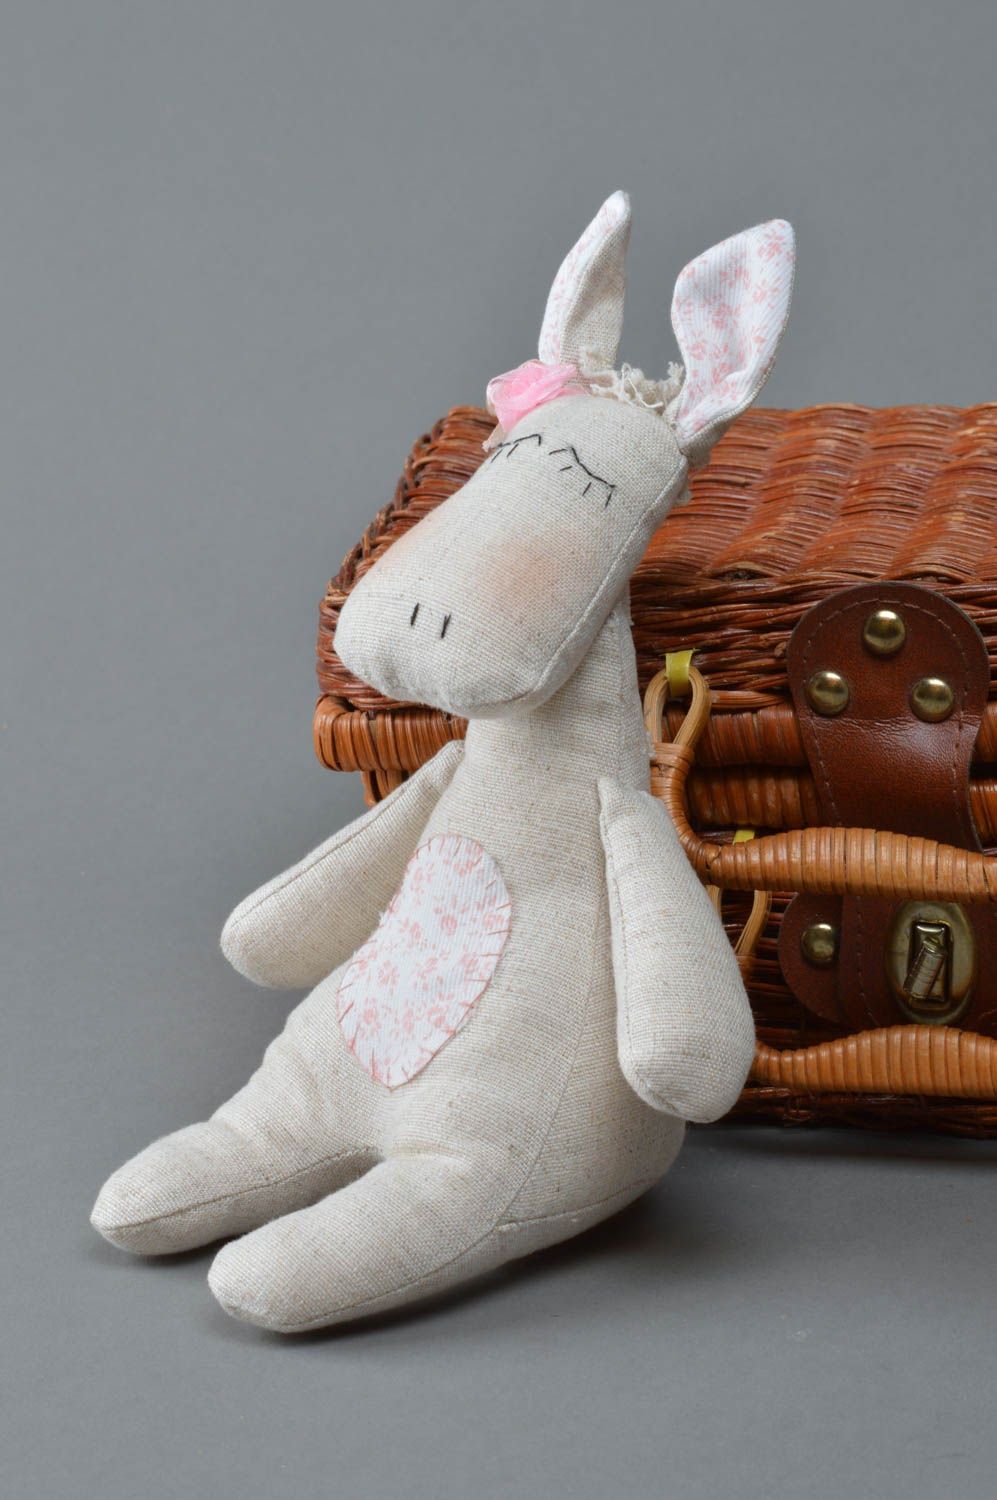 Handmade linen and cotton fabric soft toy light sleepy donkey for kids and decor photo 2